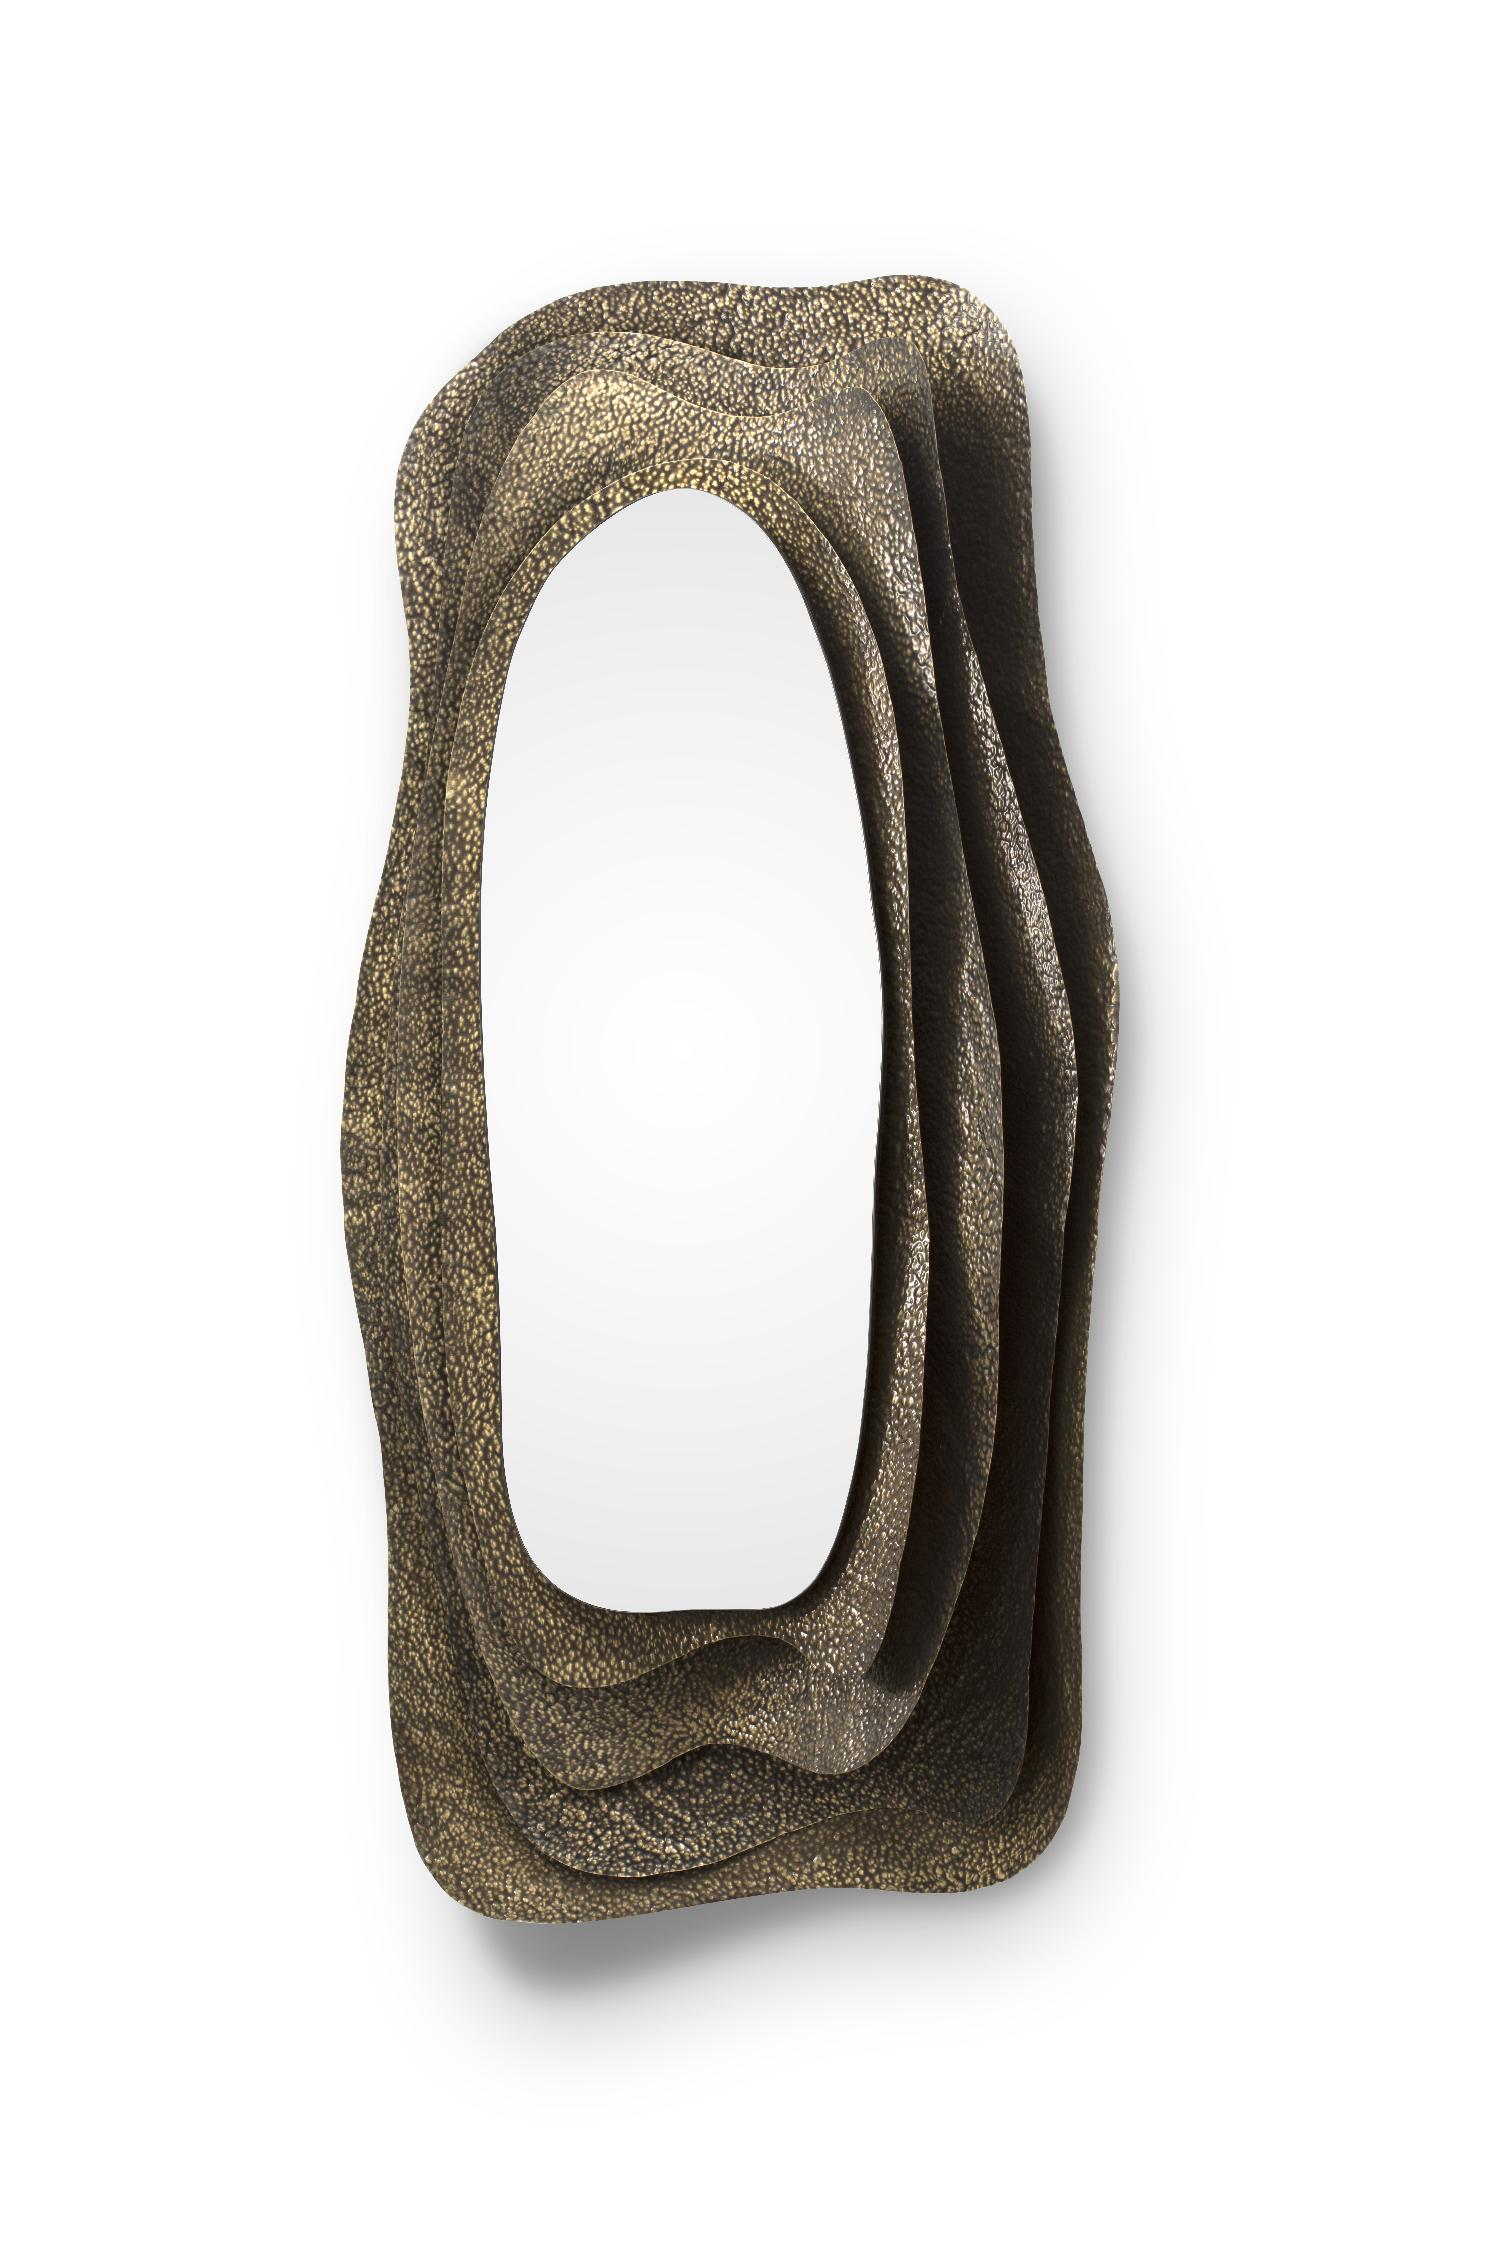 Portuguese Kumi I Rectangular Mirror in Hammered Aged Brass by Brabbu For Sale